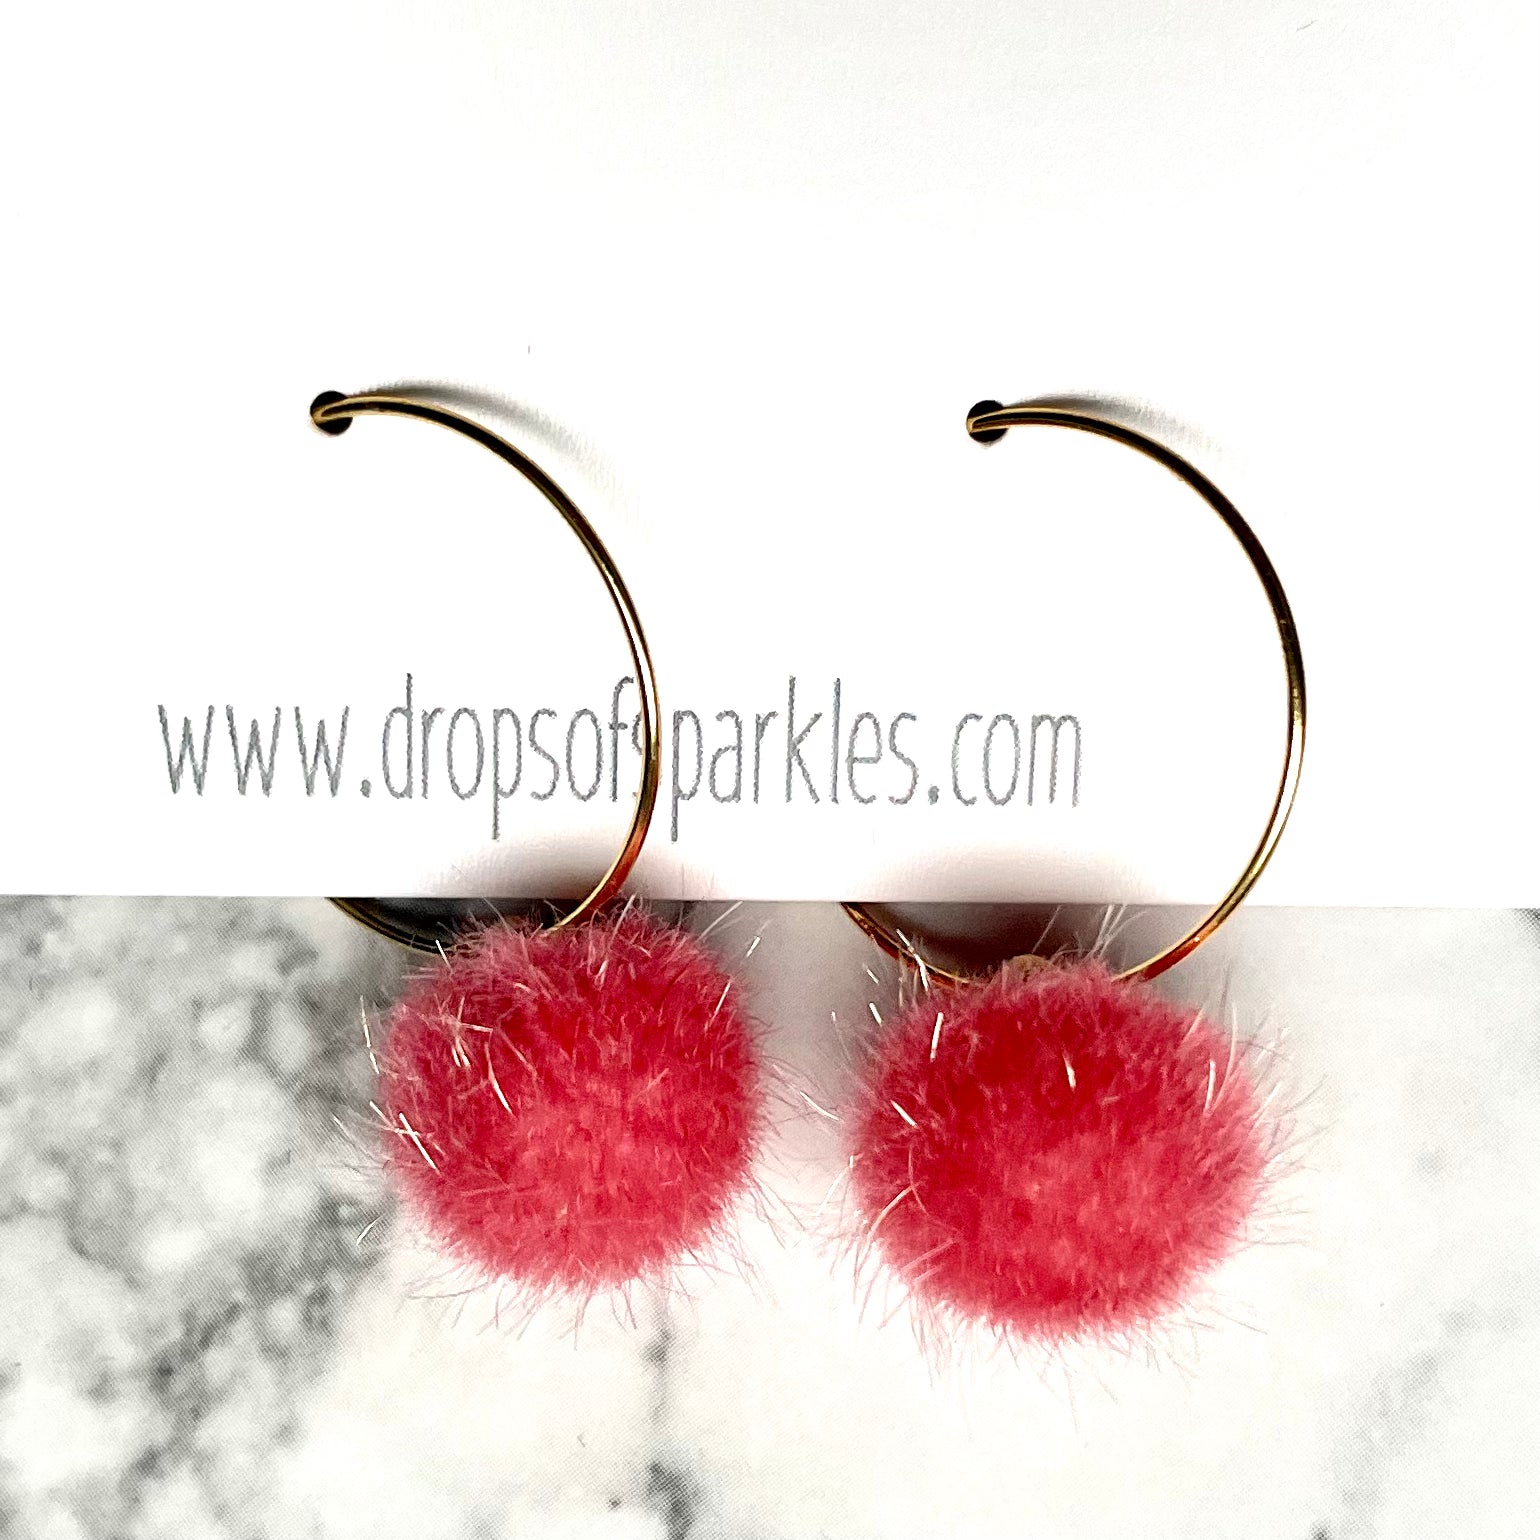 20mm round 24k shiny gold plated  "hoops" with fun little bubblegum pink fuzzy pom poms attached